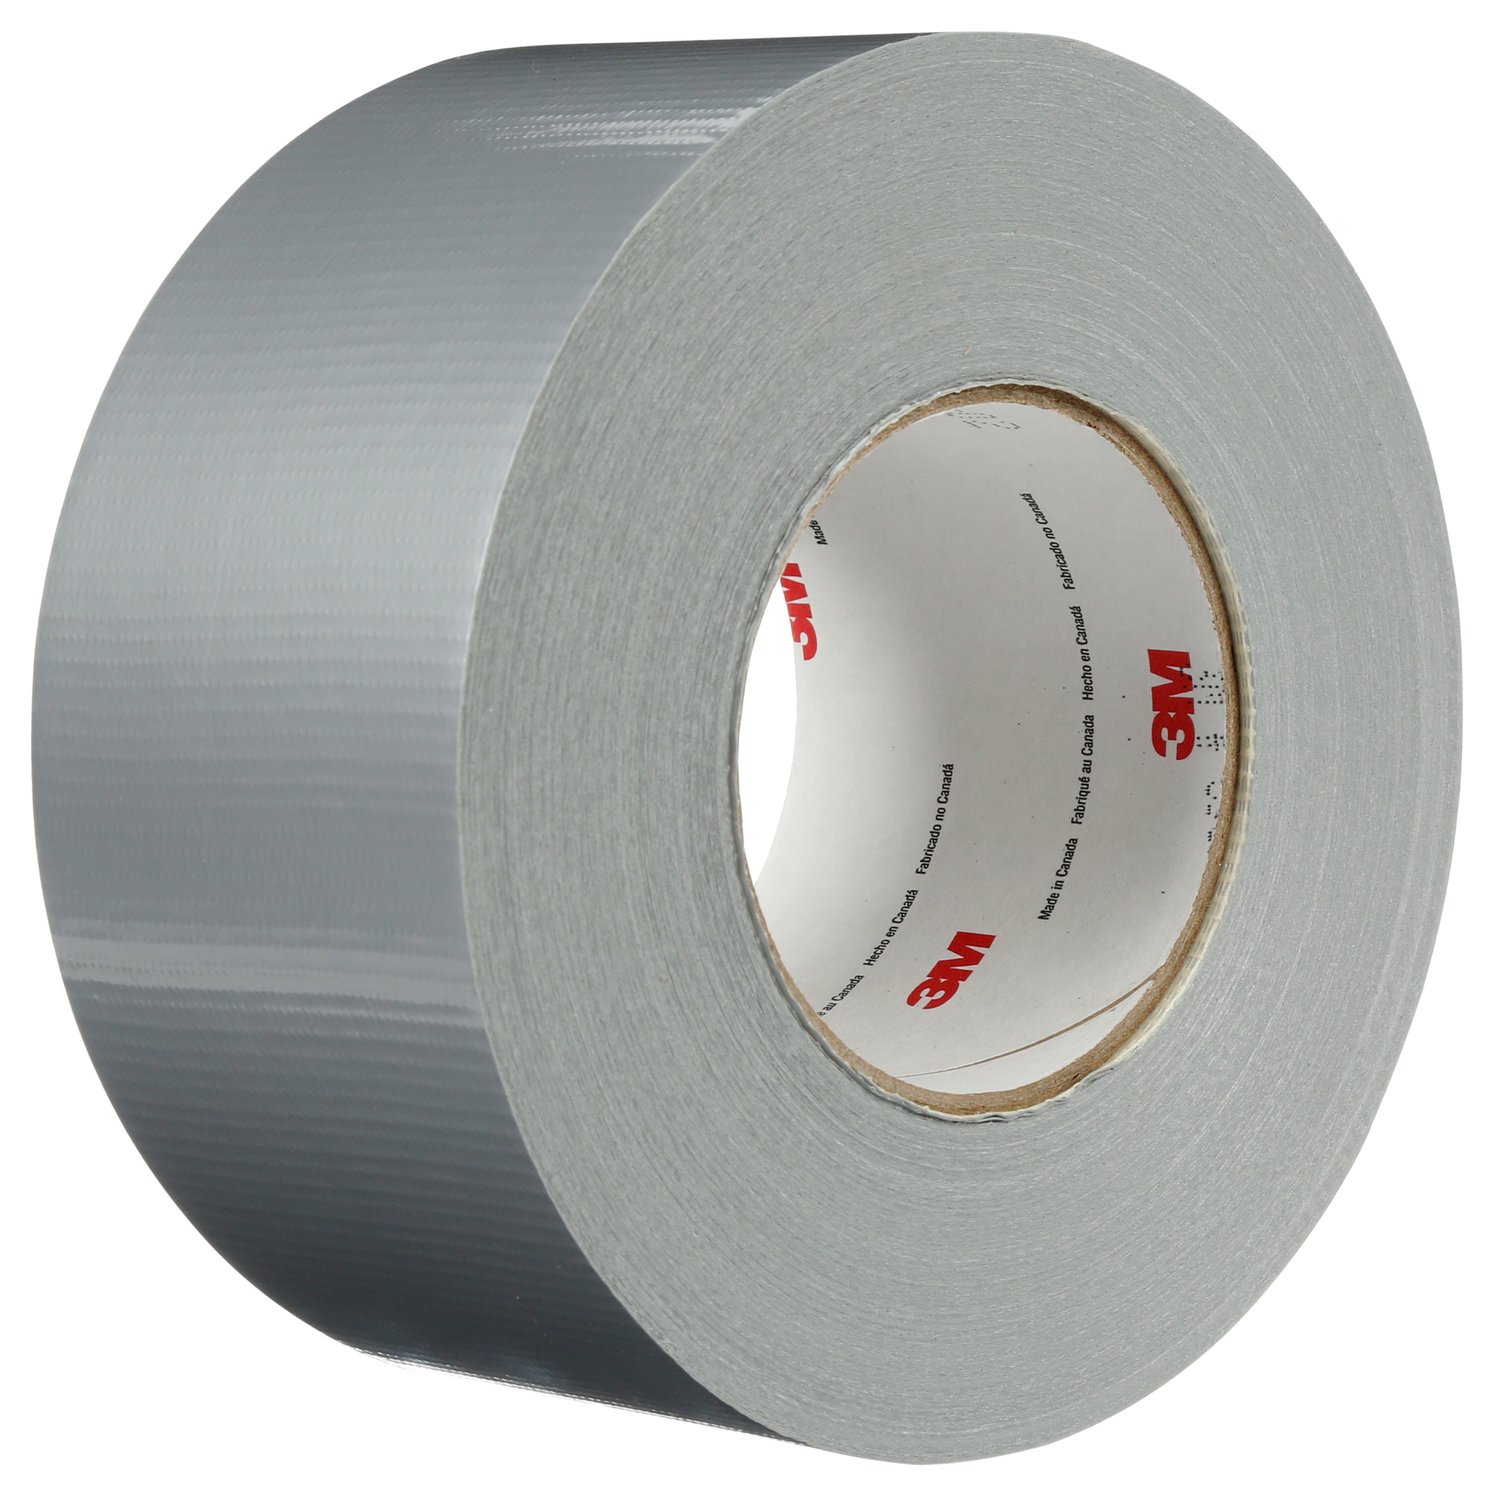 7000001231 - 3M Extra Heavy Duty Duct Tape 6969, Silver, 72 mm x 54.8 m, 10.7 mil, 12/Case